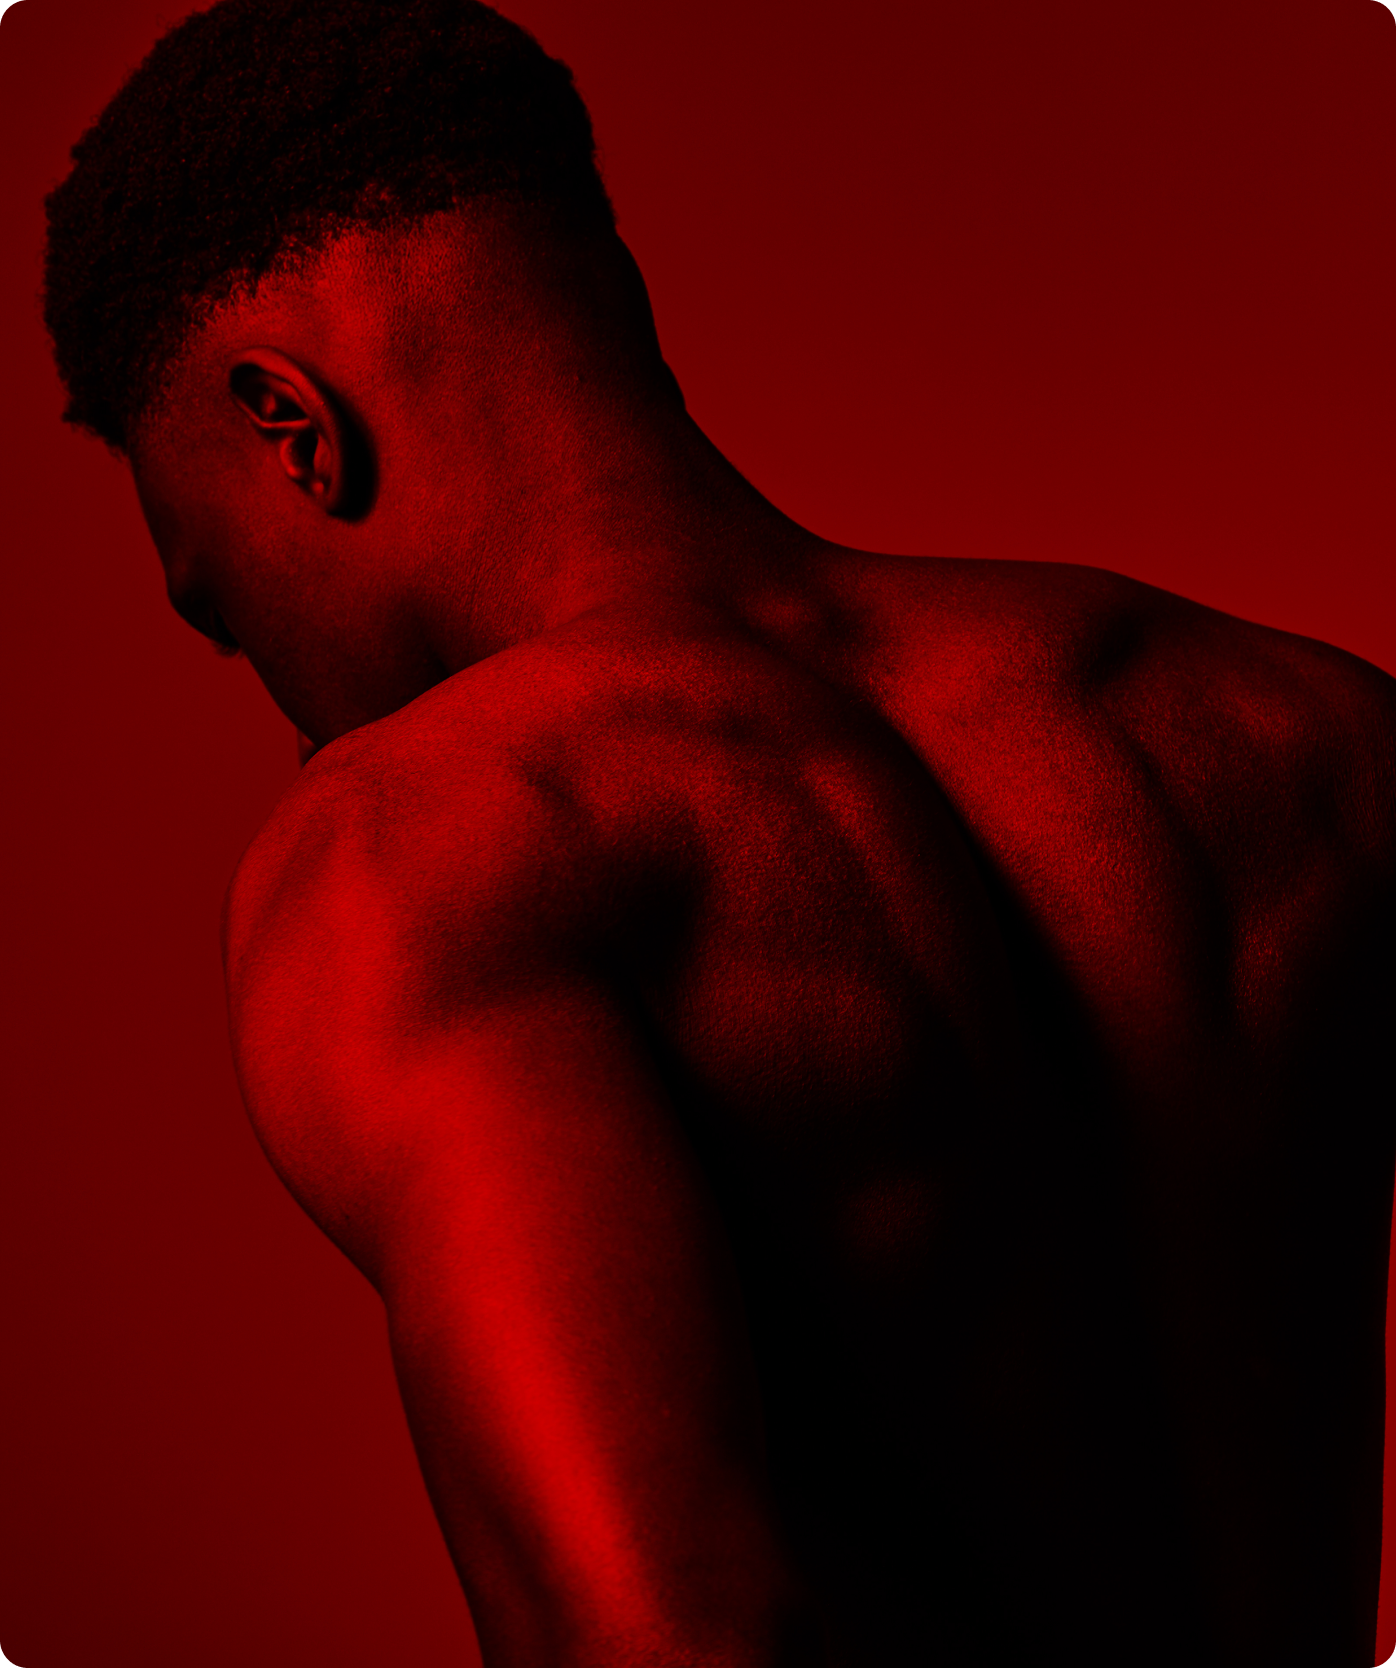 A photo of a man's shoulders, upper back and head, bathed in a red wash of light on a red background.